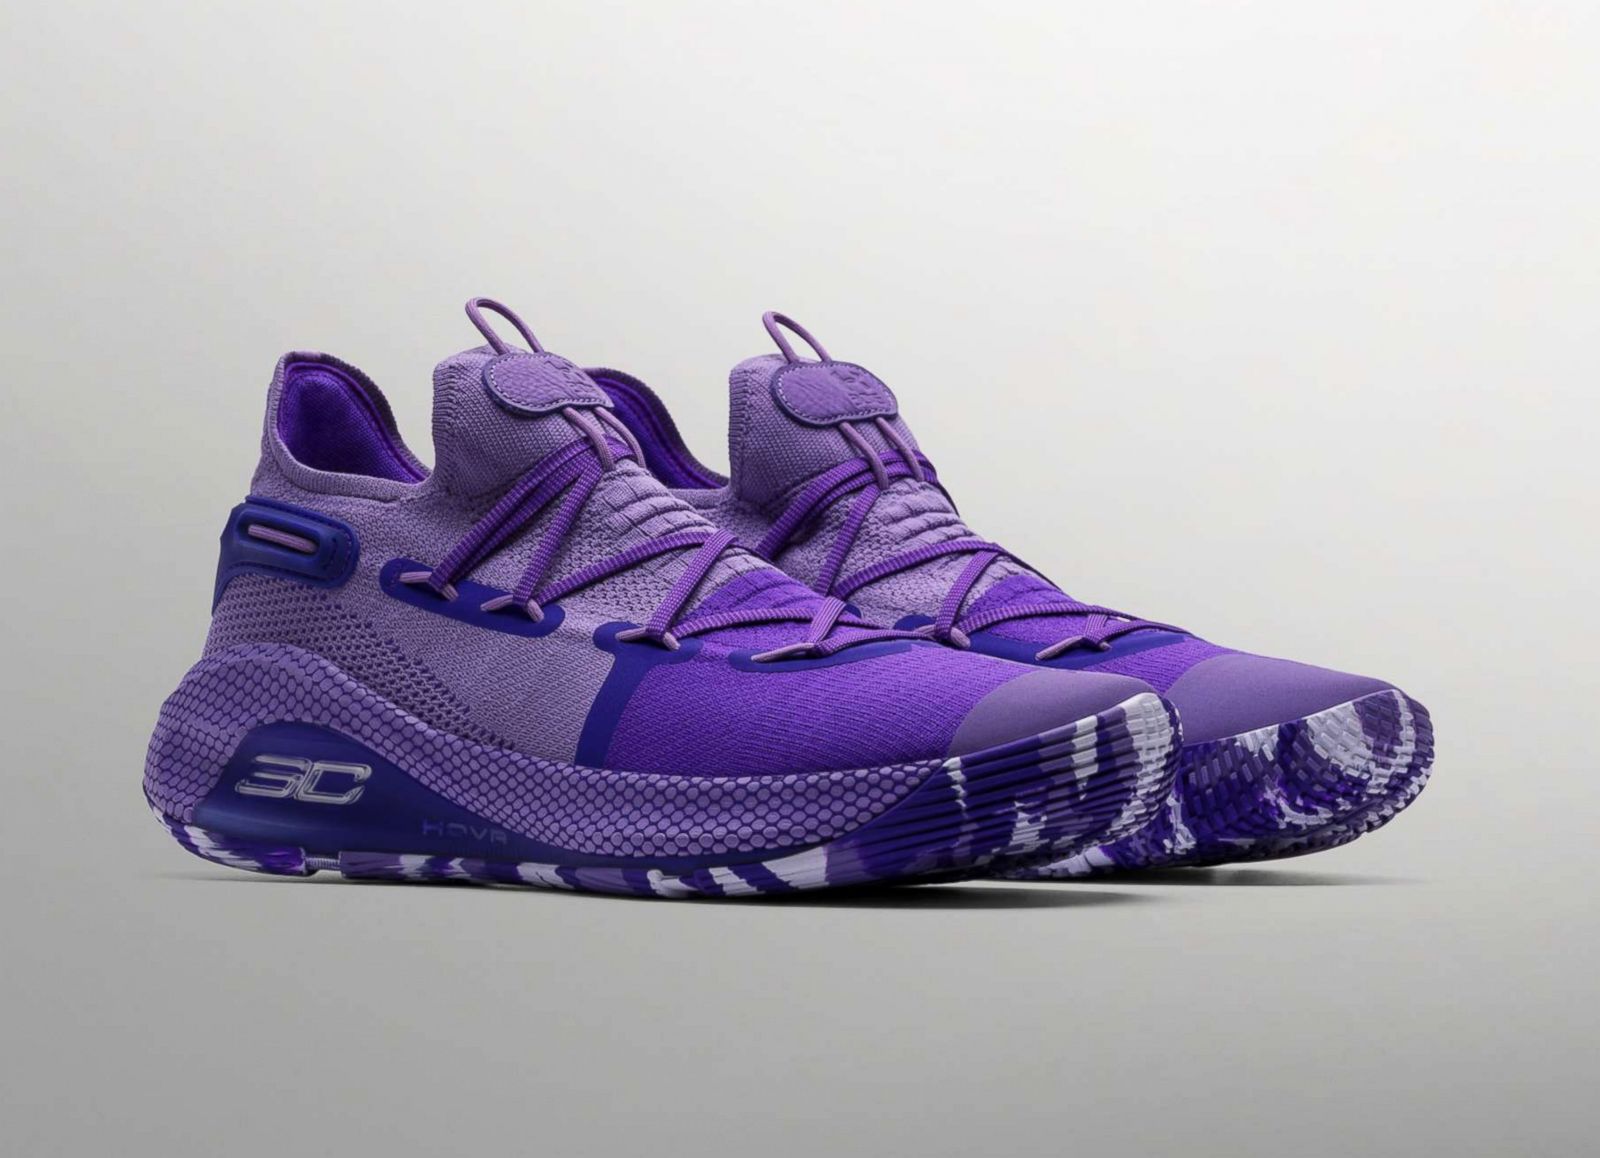 stephen curry shoes 5 purple